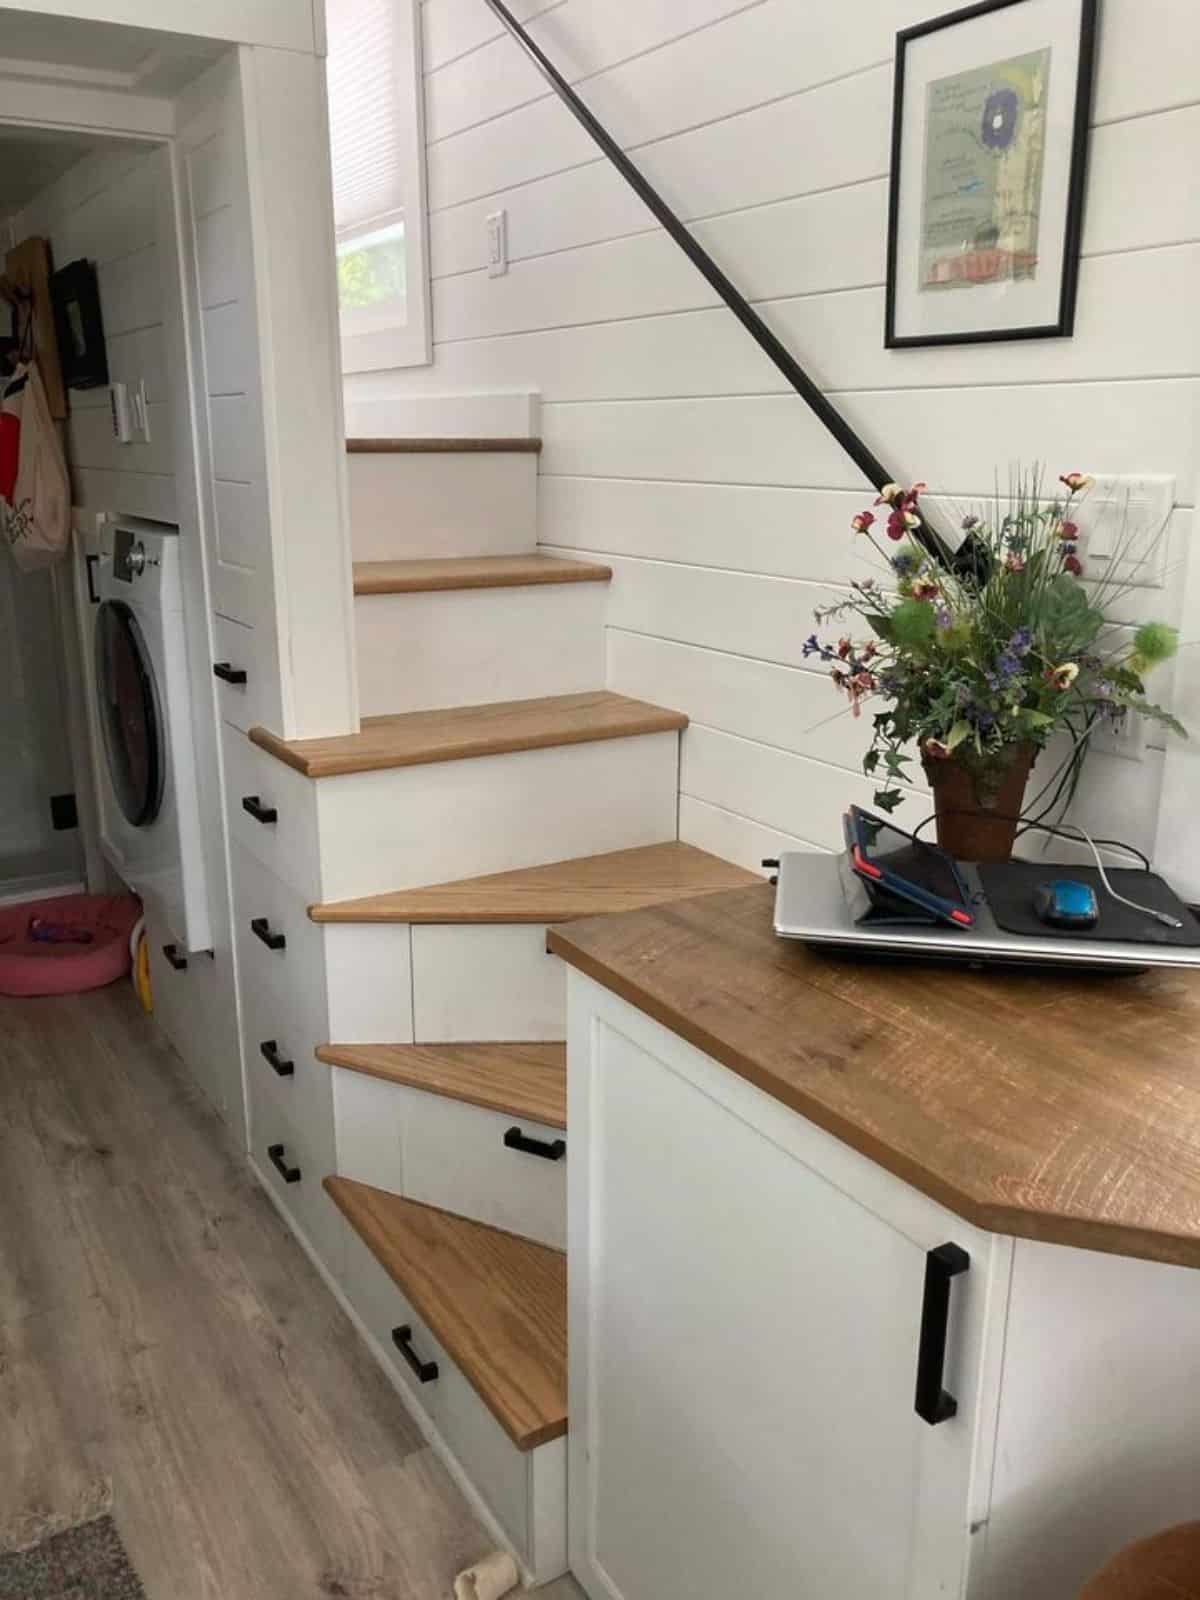 Stairs leading to bedroom has washer dryer combo and other storage underneath